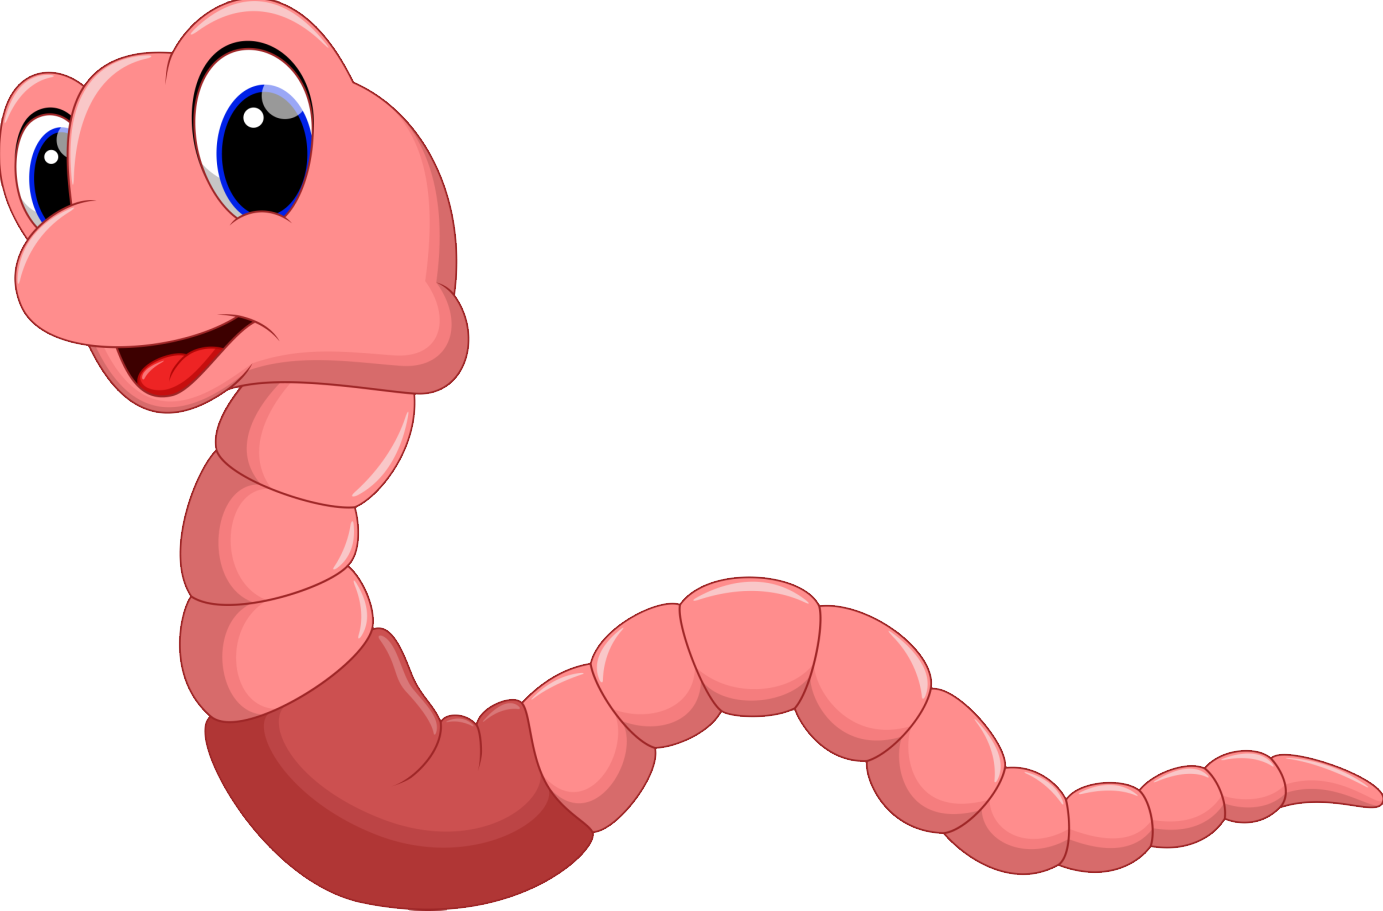 Worm clipart transparent background. Earthworm png image with